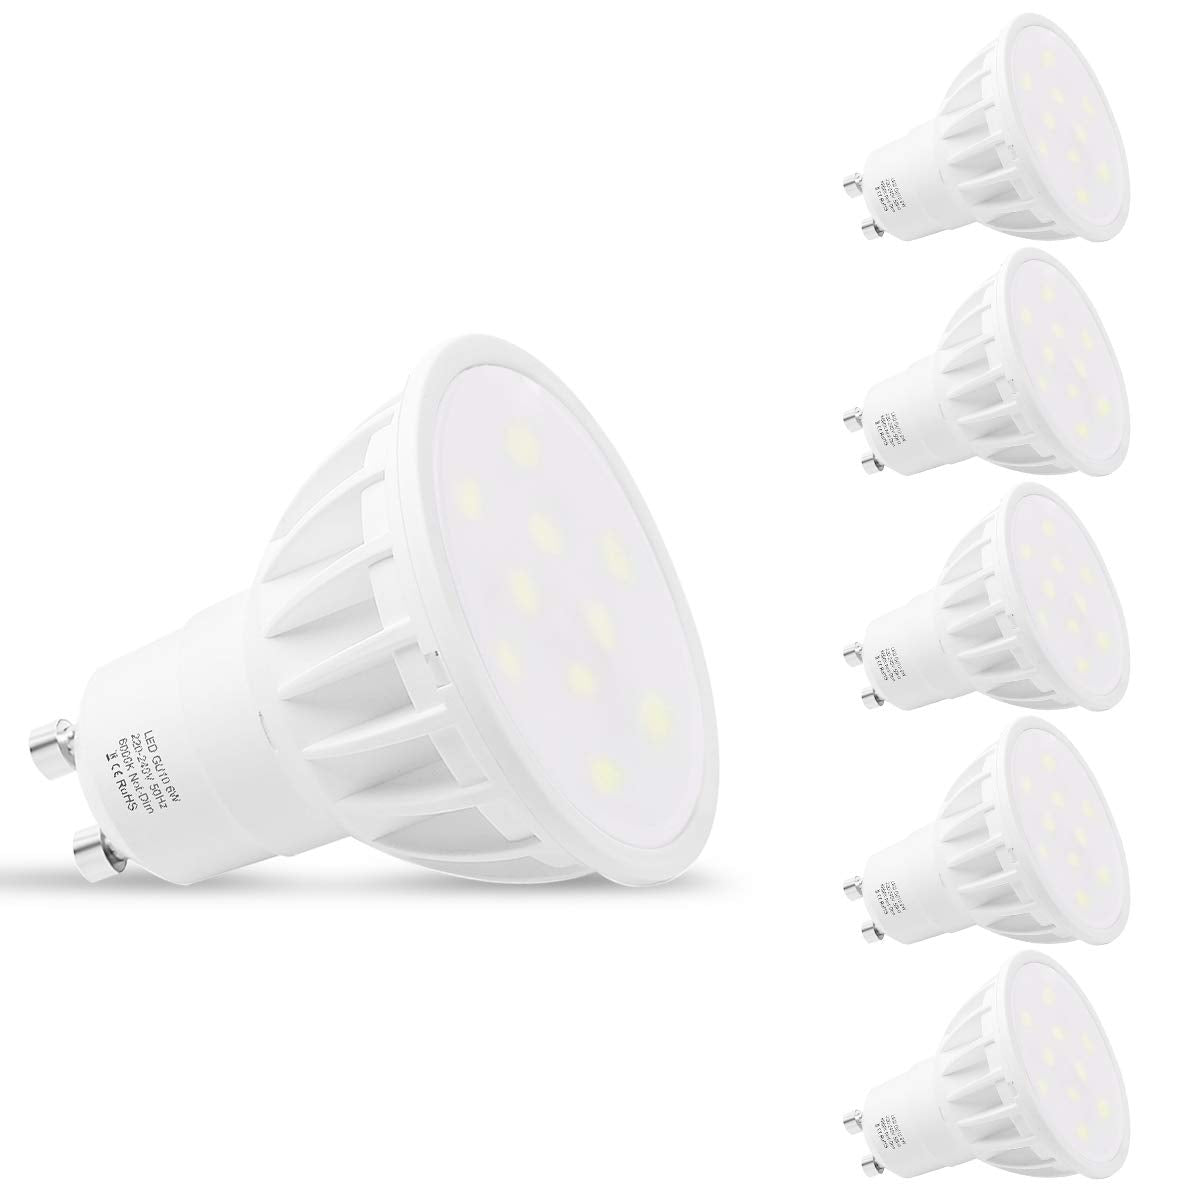 LEHASI GU10 LED Bulbs, Cool White 6000K LED Spotlight Bulbs, 500Lm, 6W Equivalent to 50W Halogen Bulb, 230V, Non Dimmable, 120 Degree Beam Angle, Lighting for Kitchens, Bedrooms, Hallways, Pack of 5